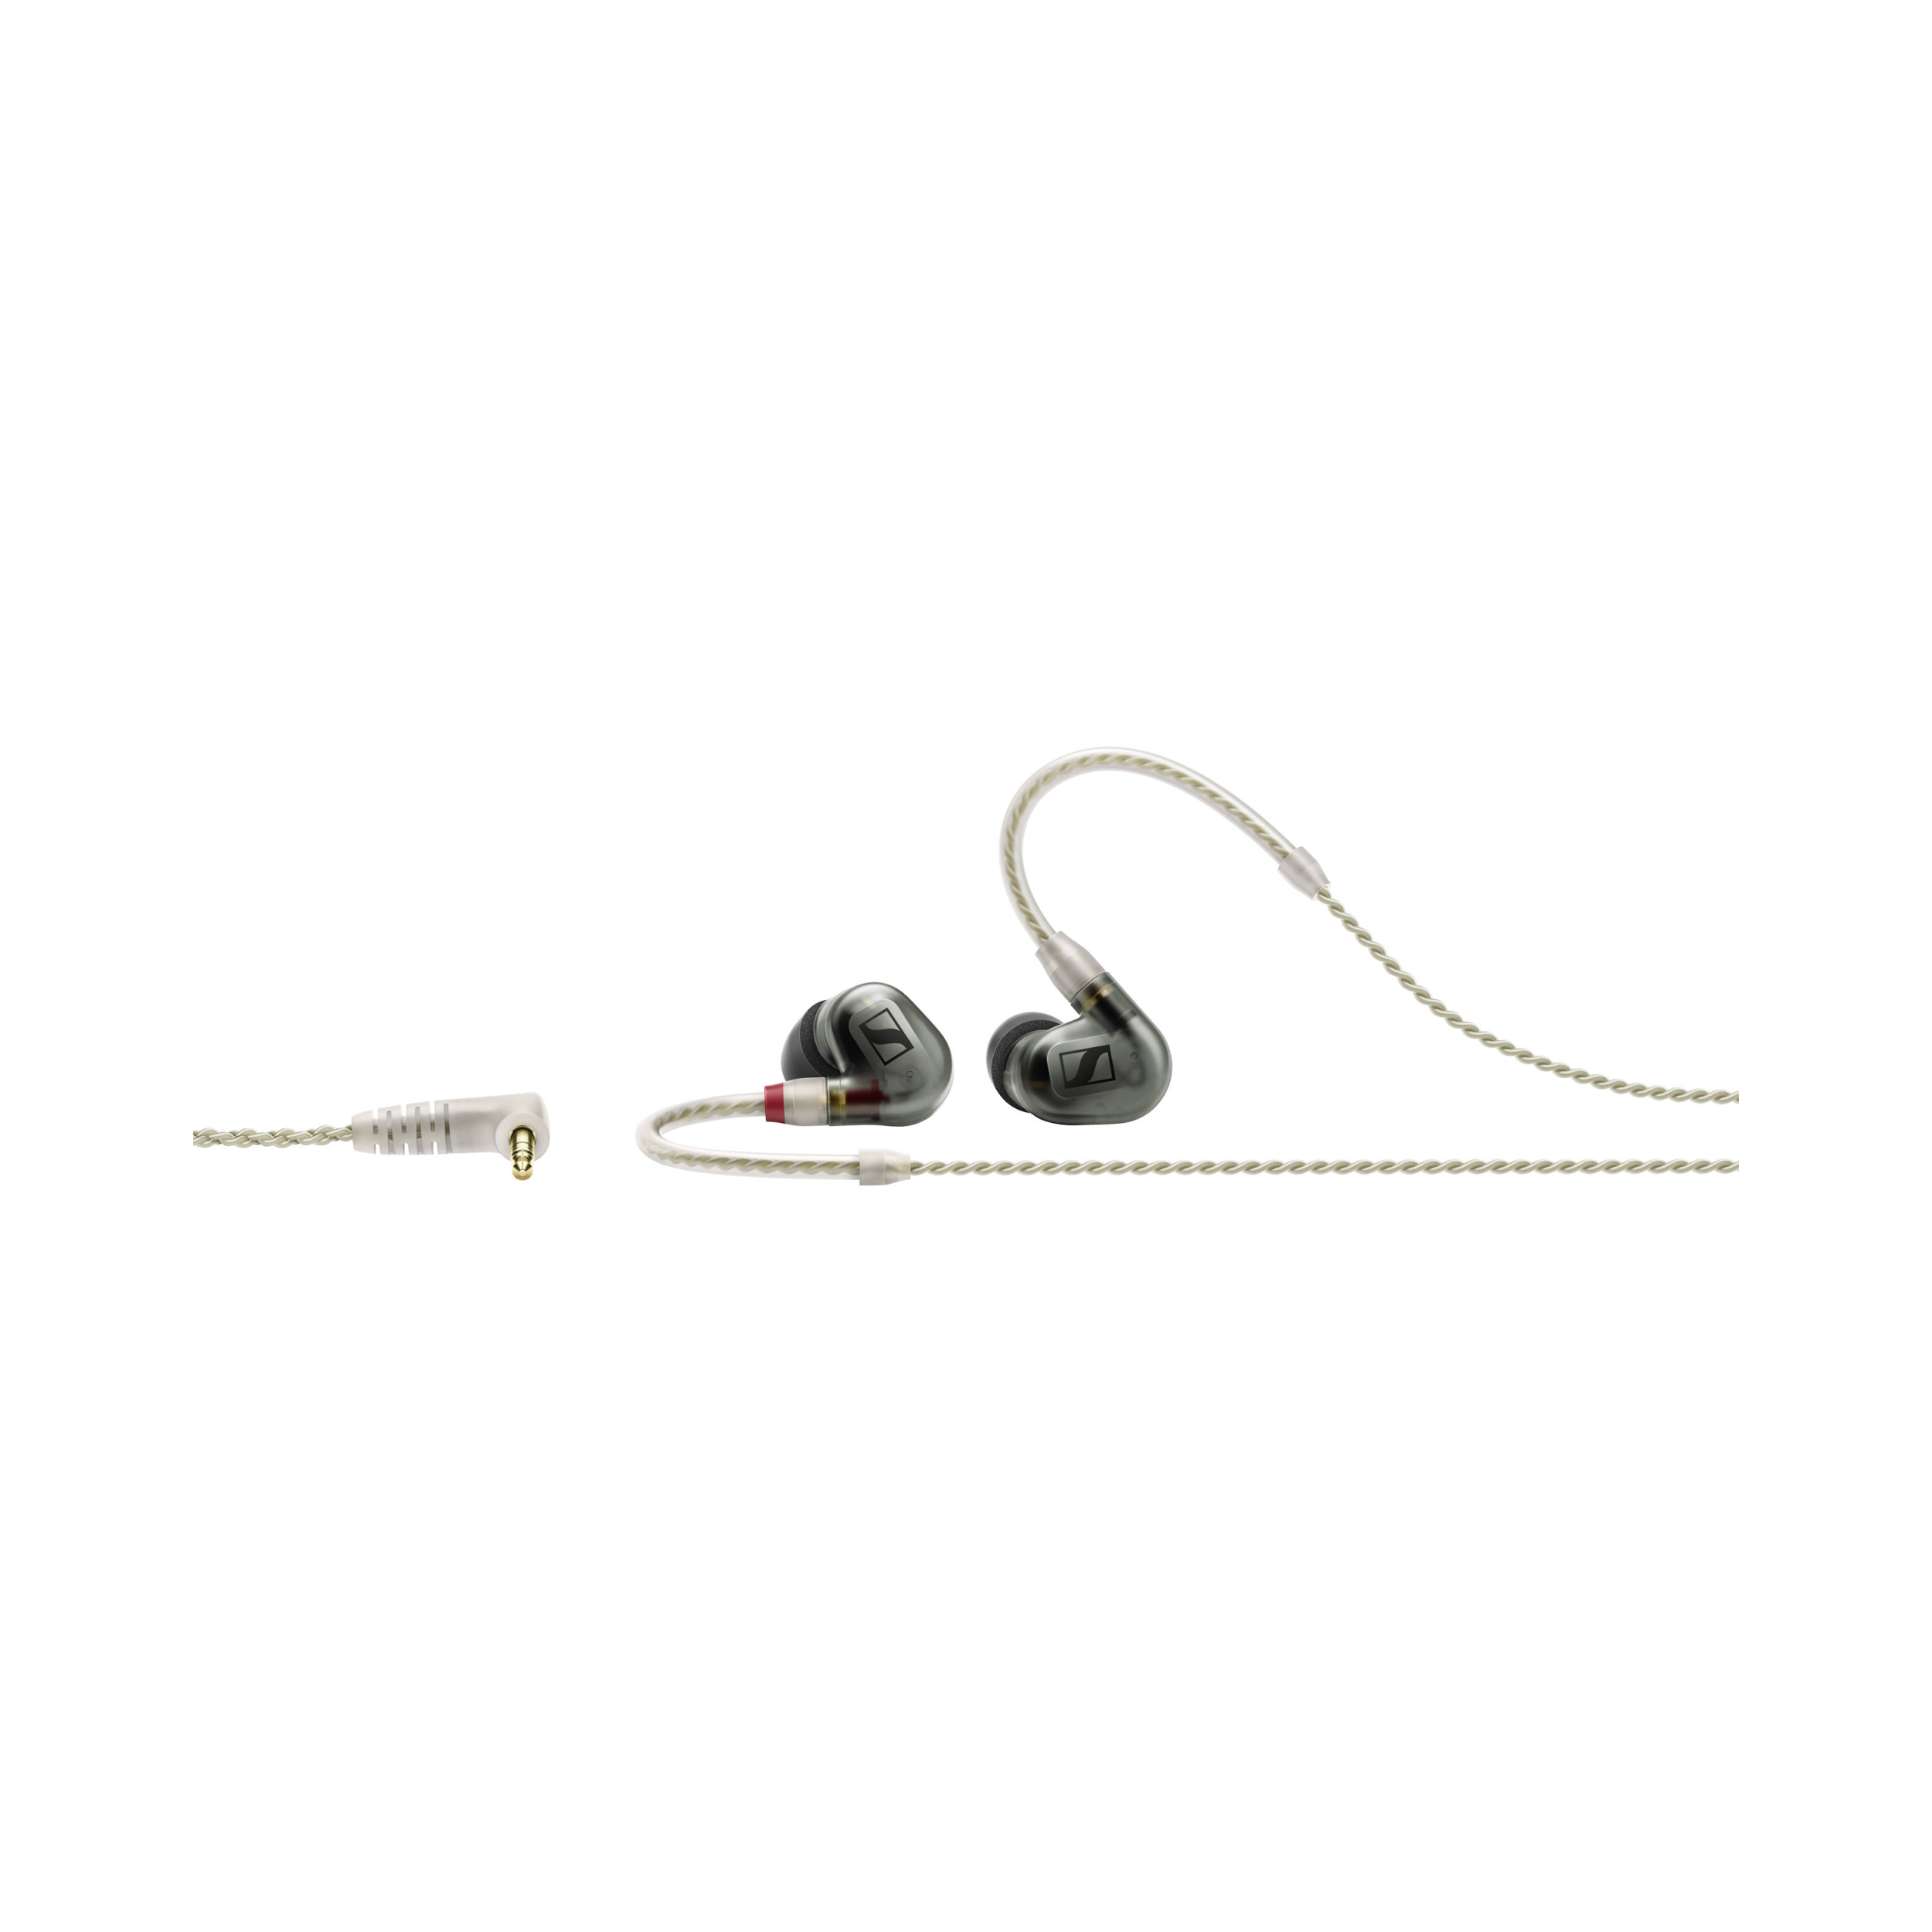 Sennheiser IE 500 PRO In-Ear Headphones for Wireless Monitoring Systems  (Smoky Black)